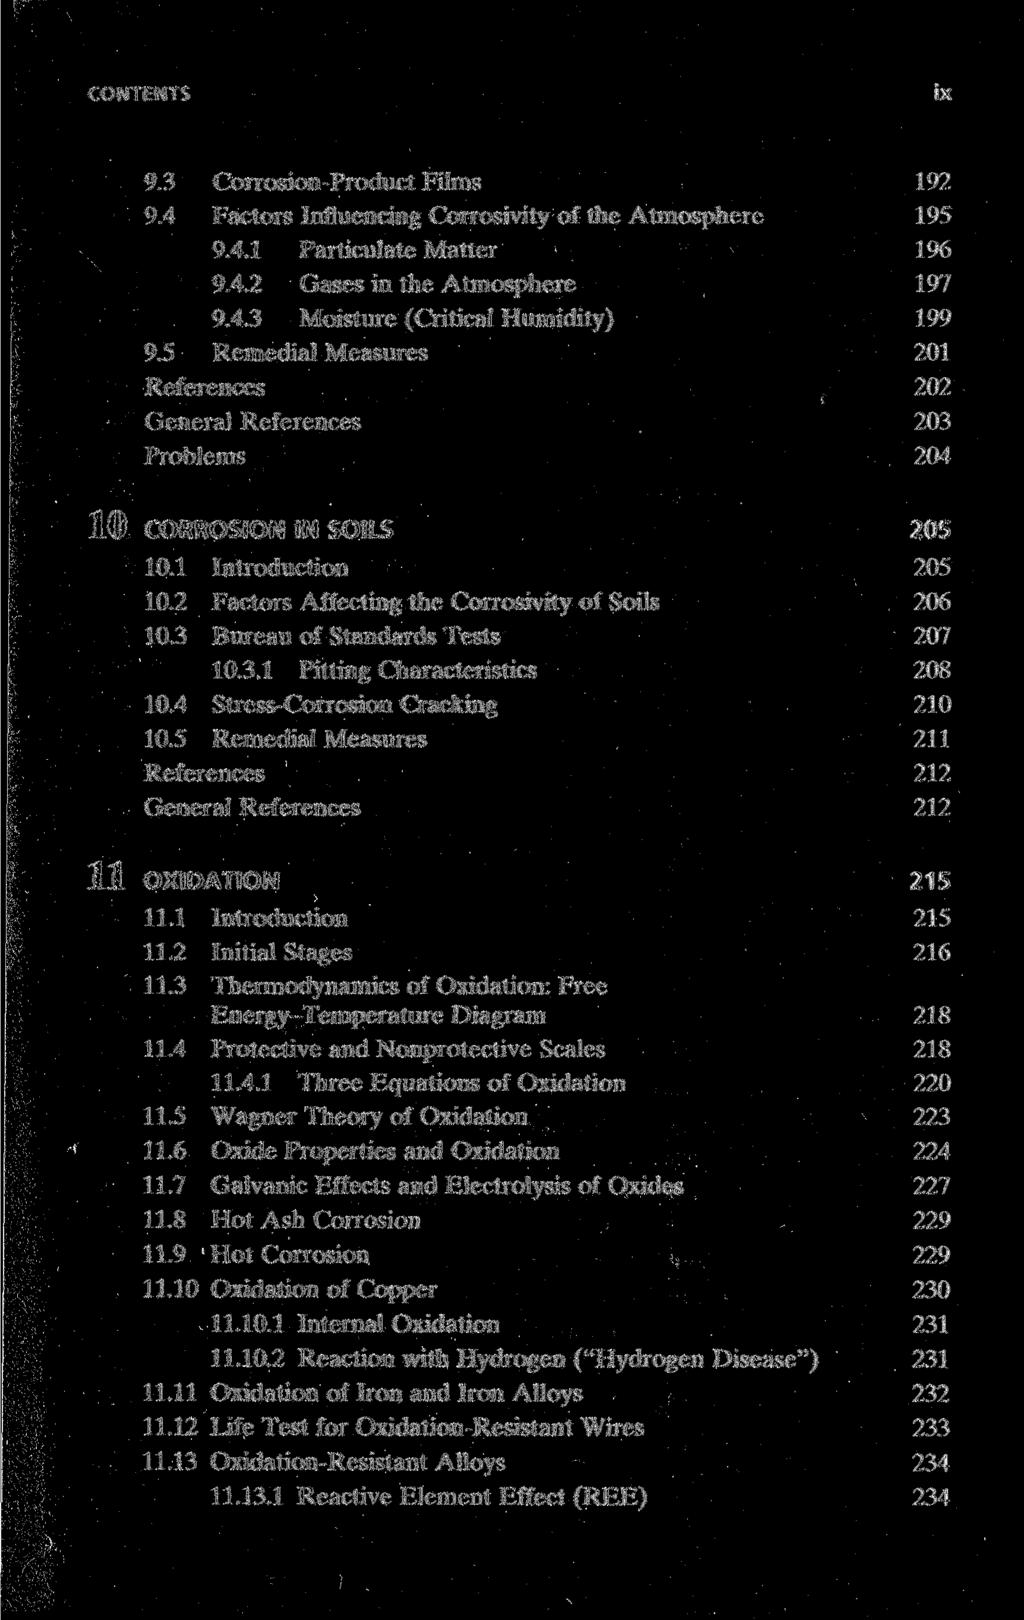 ix 9.3 Corrosion-Product Films 192 9.4 Factors Influencing Corrosivity of the Atmosphere 195 9.4.1 Particulate Matter 196 9.4.2 Gases in the Atmosphere 197 9.4.3 Moisture (Critical Humidity) 199 9.